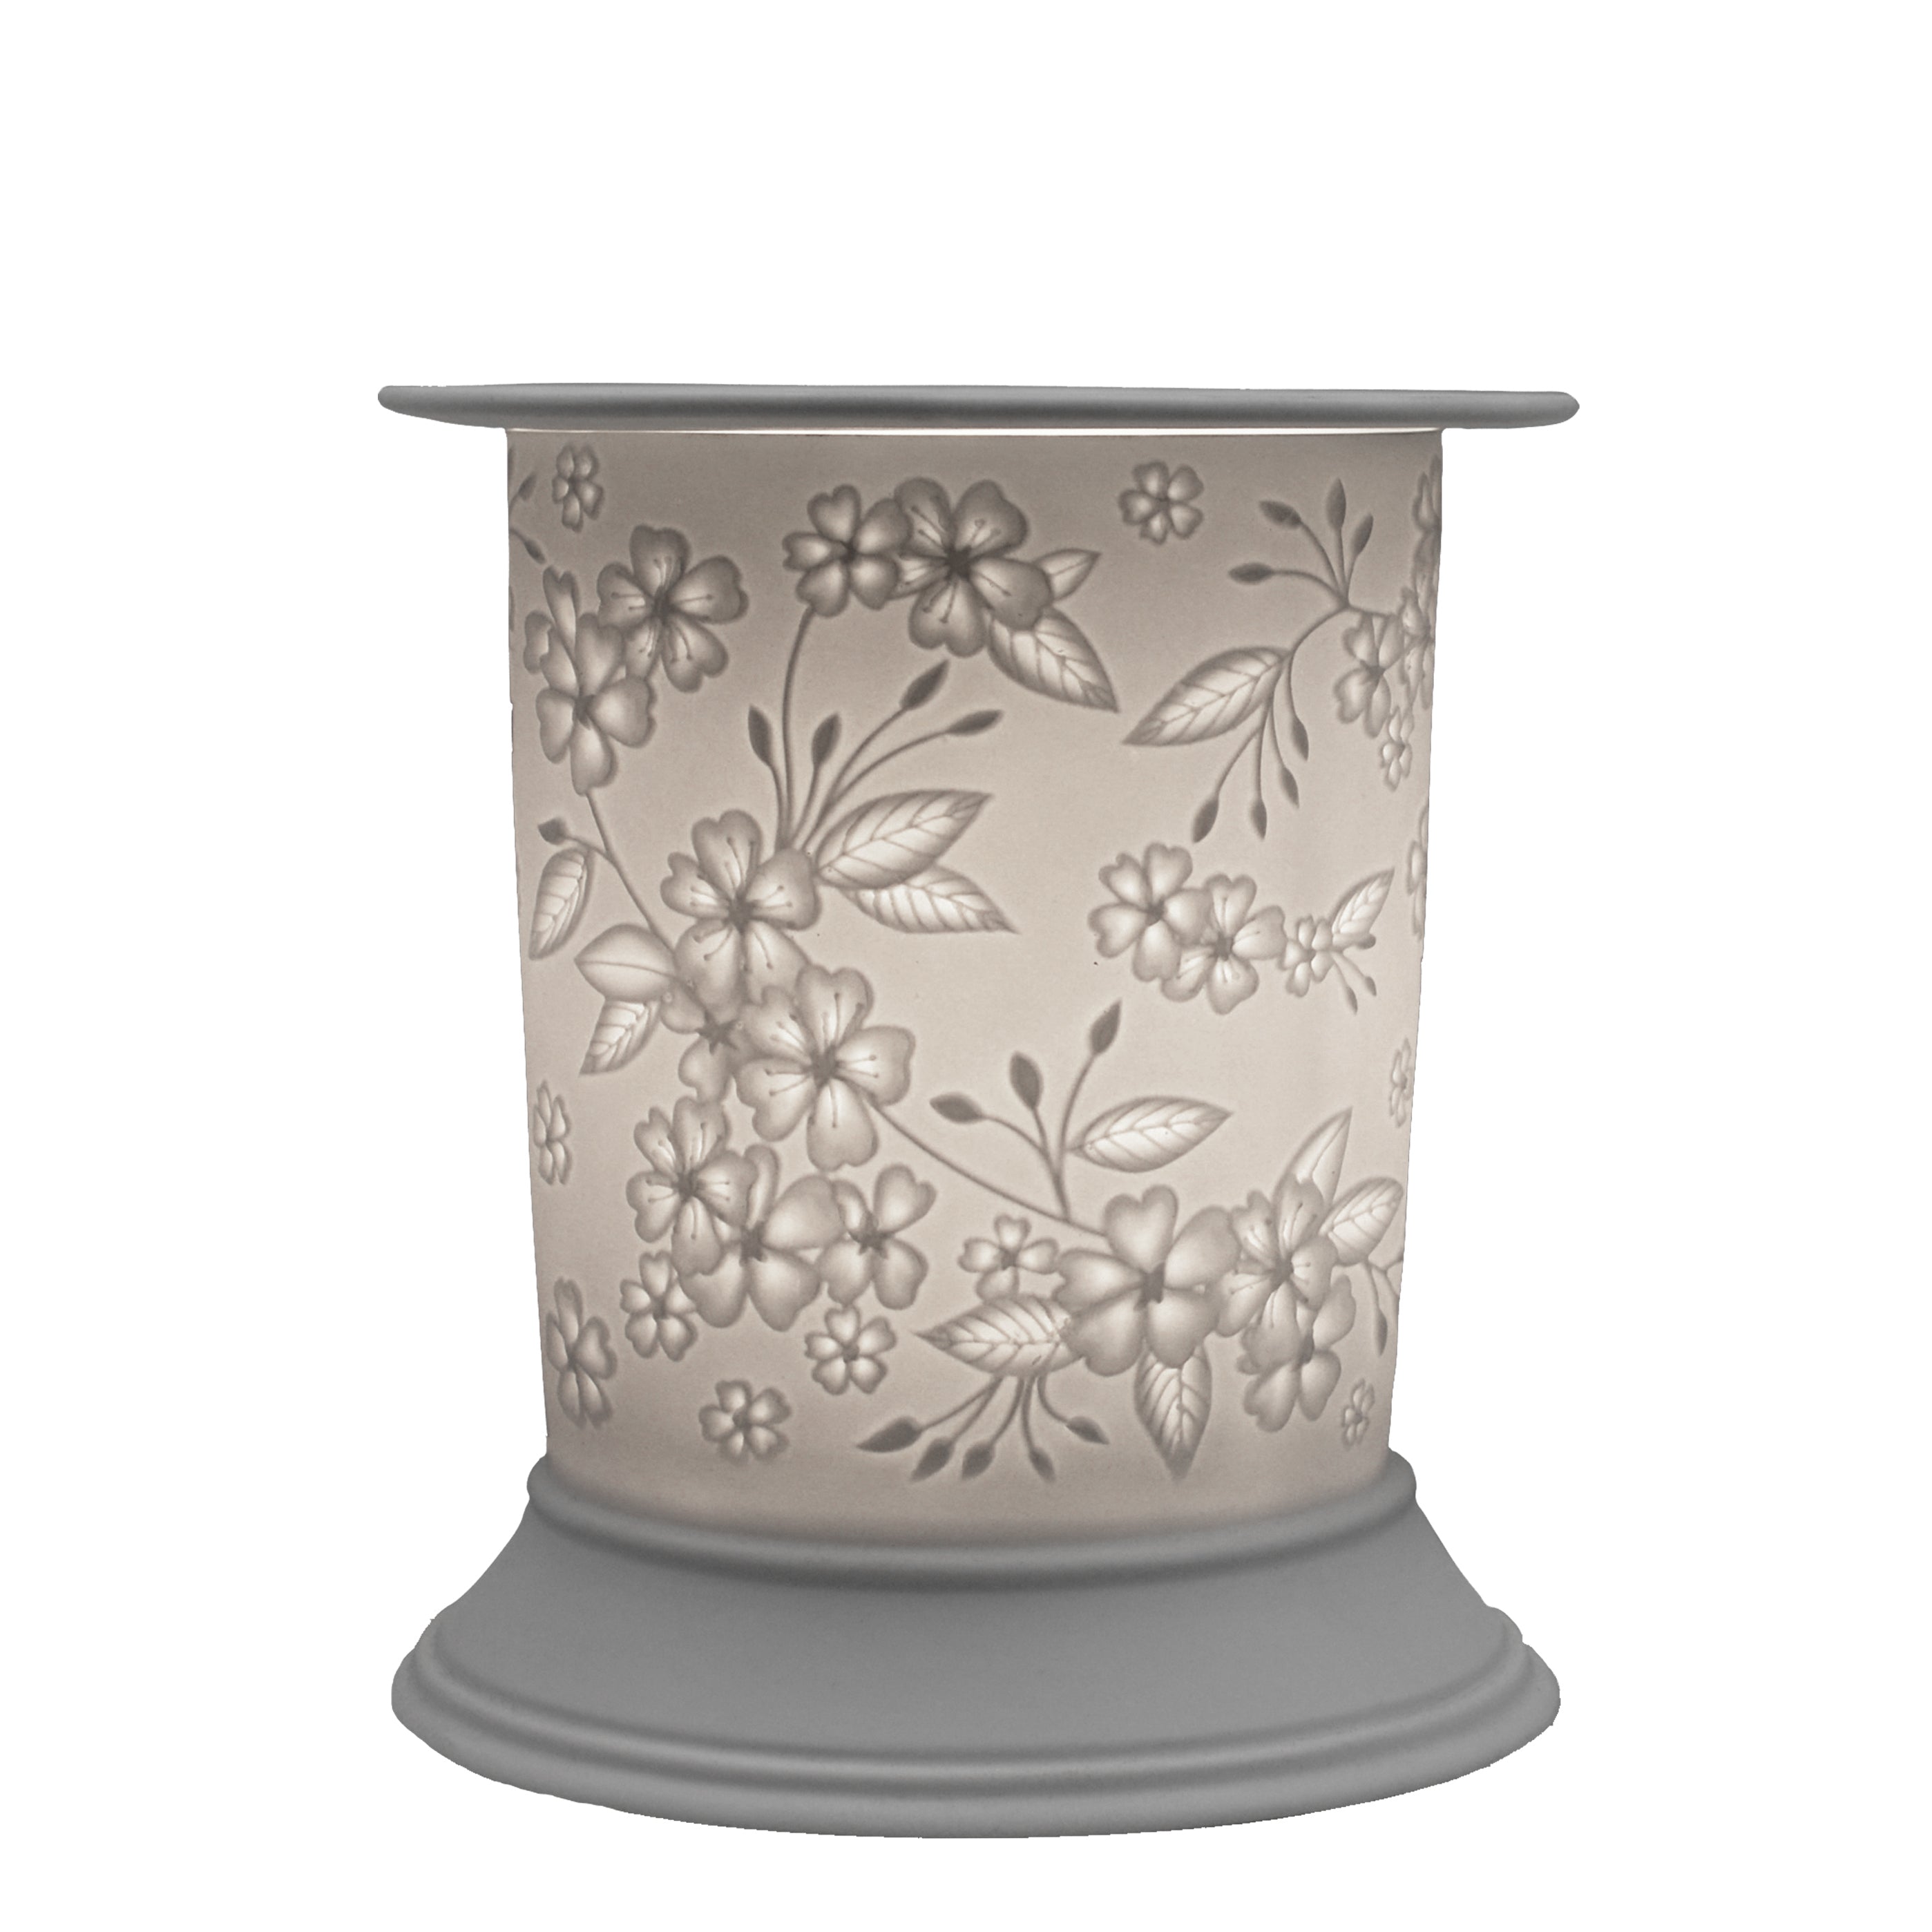 The porcelain material on this Wax Melt Burner allows bright light to shine through it, providing the opportunity to create this striking Spring design. This is done by crafting images out of thicker and thinner sections of the porcelain, allowing for detailed shadowing and a 3D effect. The porcelains elegant look will fit perfectly in any room is available in a range of designs and two different shapes.